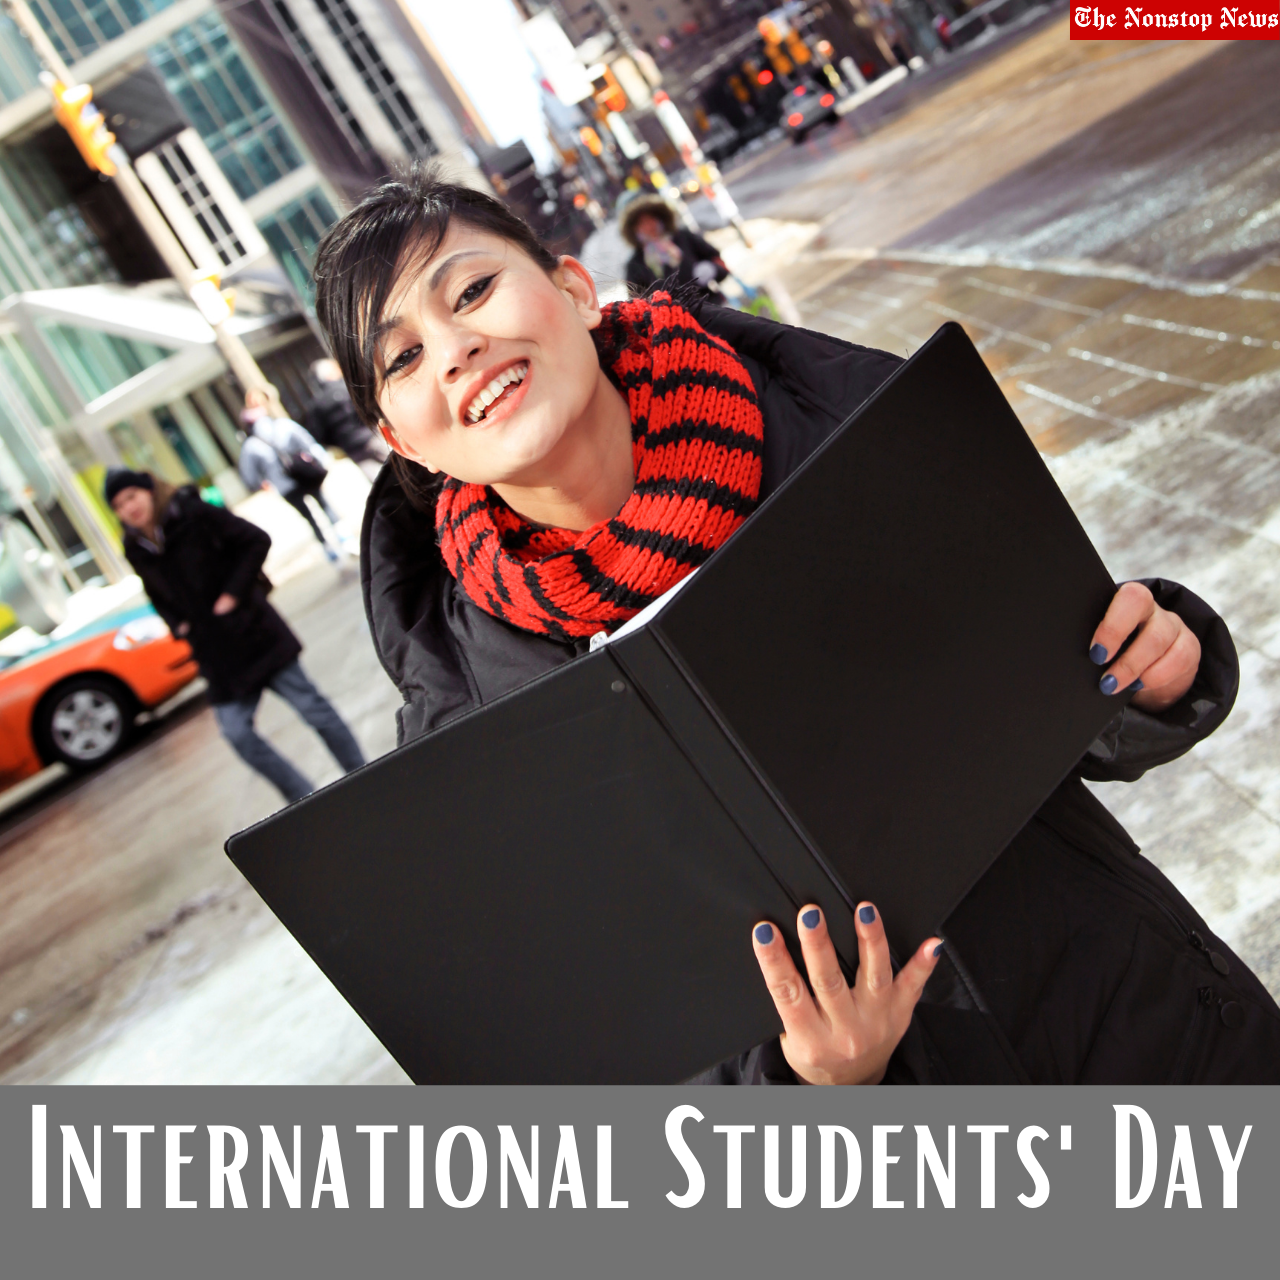 International Students' Day 2021 Wishes, Quotes, Greetings, Images, Poster, and Messages to Share